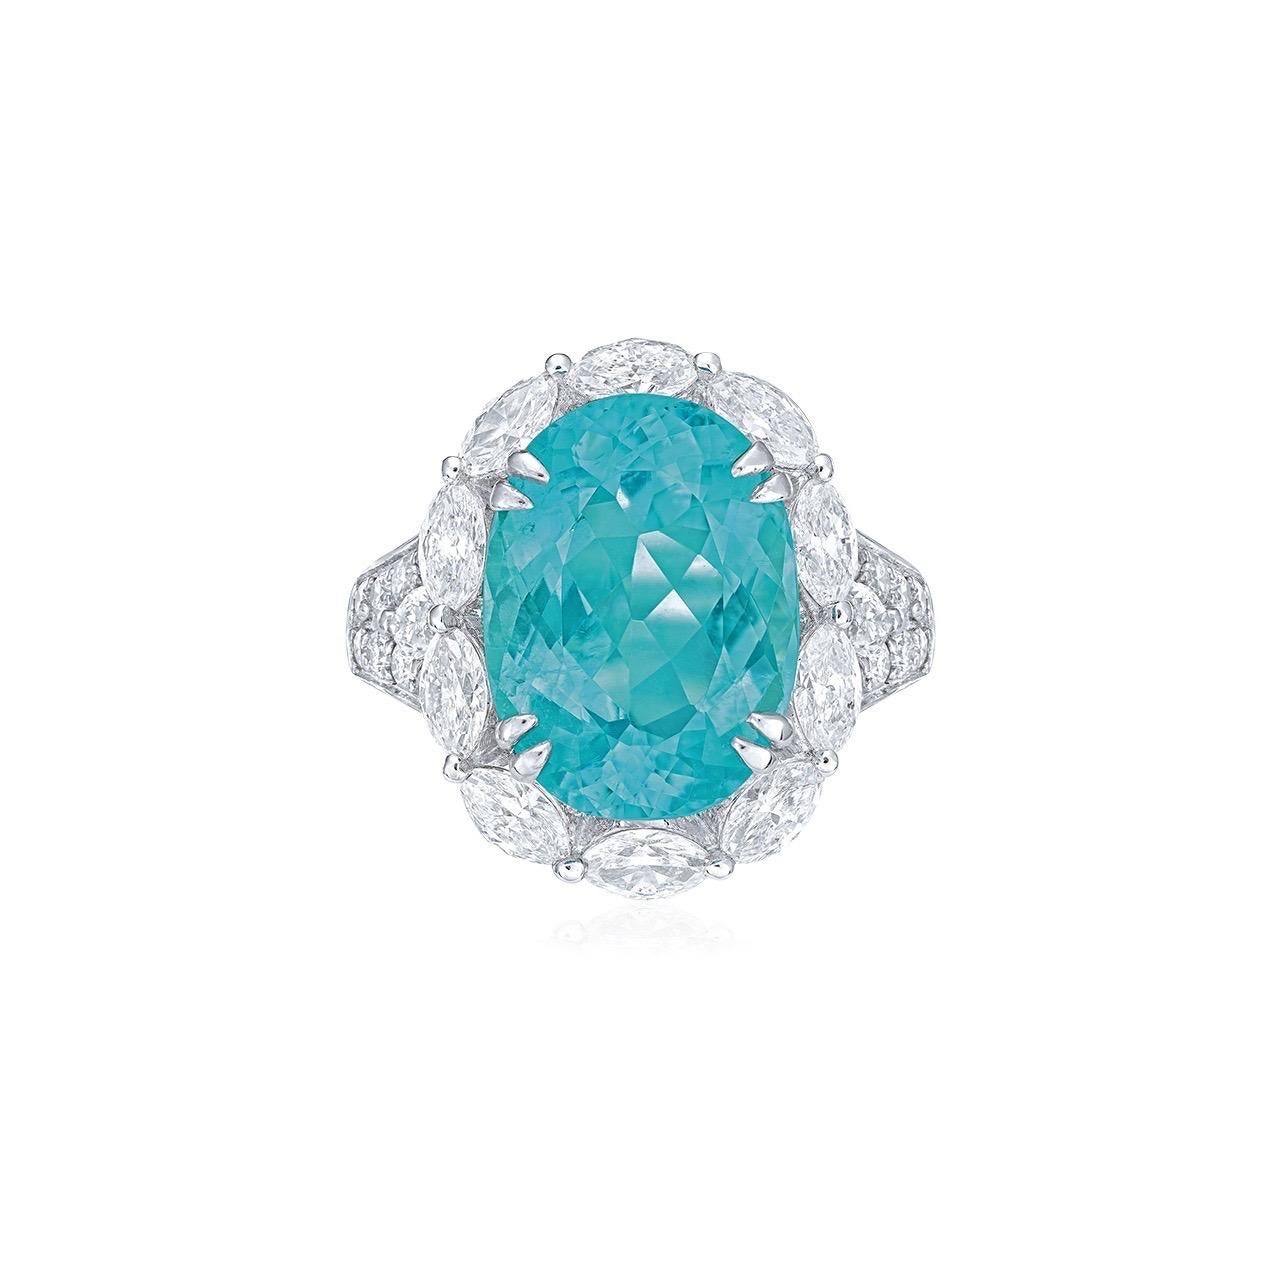 Mozambique natural Main stone: 6.57 carat Greenish Blue Paraiba. The stone is natural and untreated. 

Setting: 24 white diamonds totaling approximately 0.35 carats, 12 fancy-cut white diamonds totaling approximately 1.65 carats

From Emilio